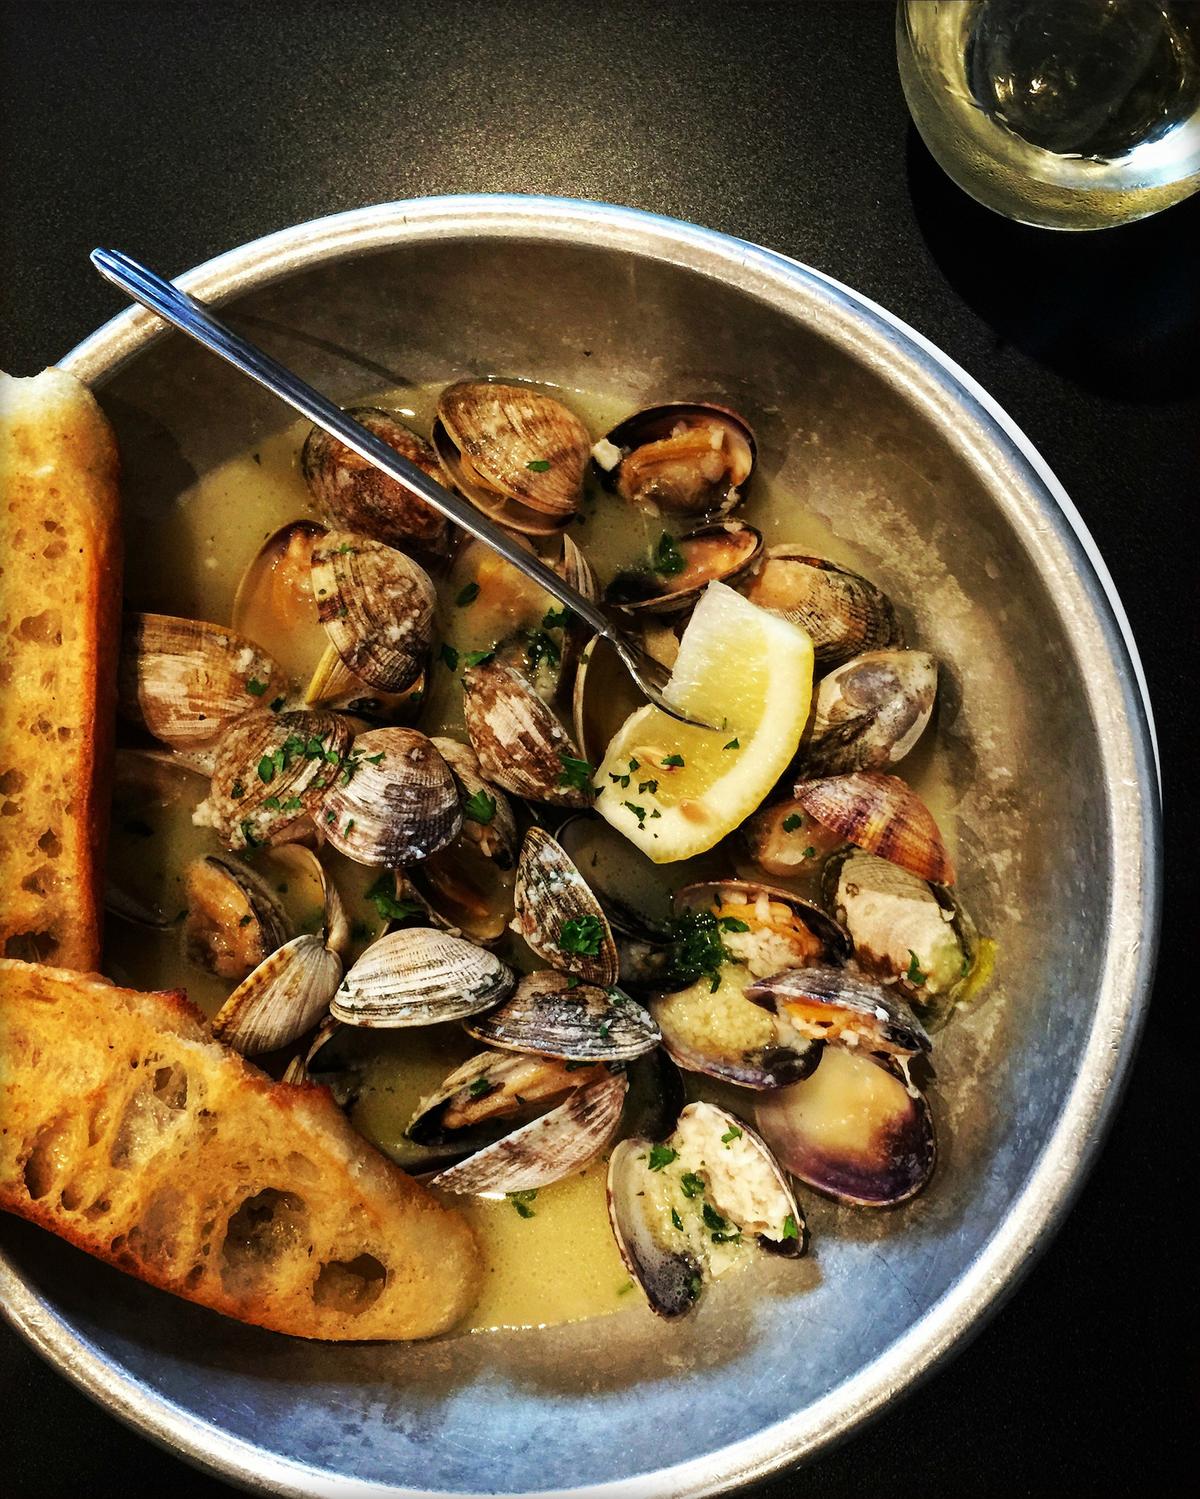 Littleneck clams are the preferred type of clam for this recipe. They are the smallest quahog clam, with sweet and tender meat. (Lynda Balslev for TasteFood)